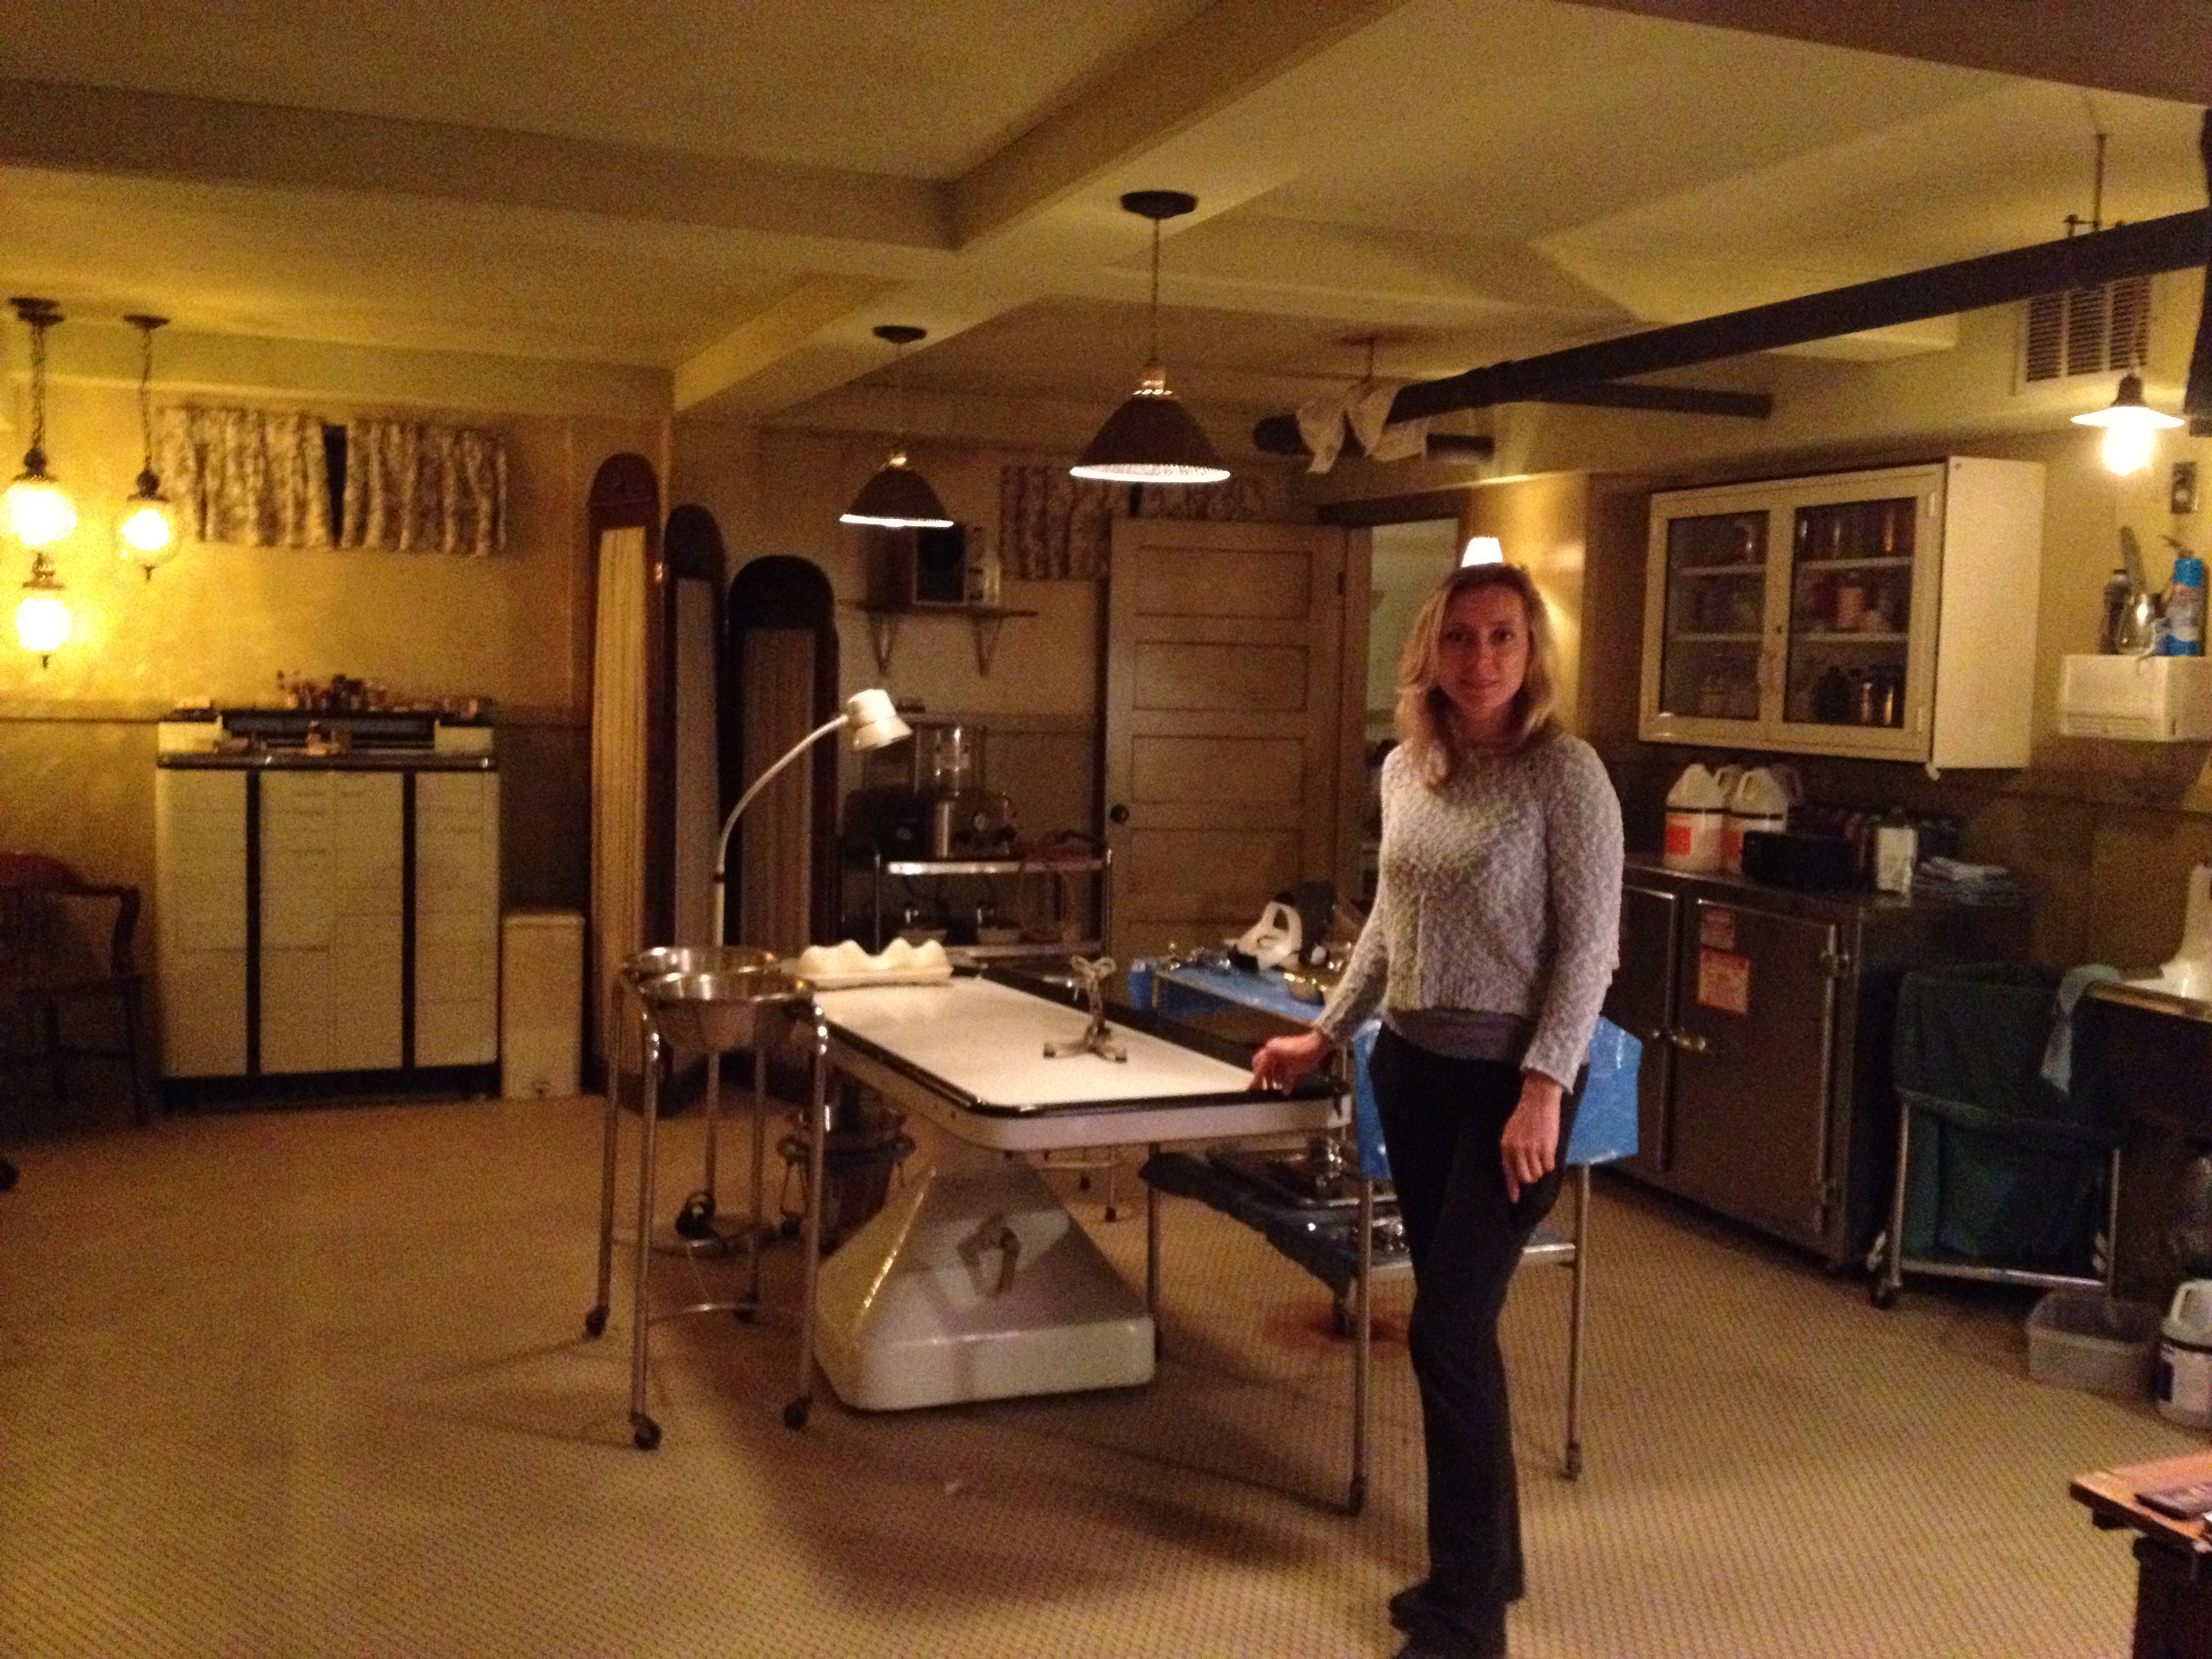 On the Morgue set of Justified, Season 4 finale